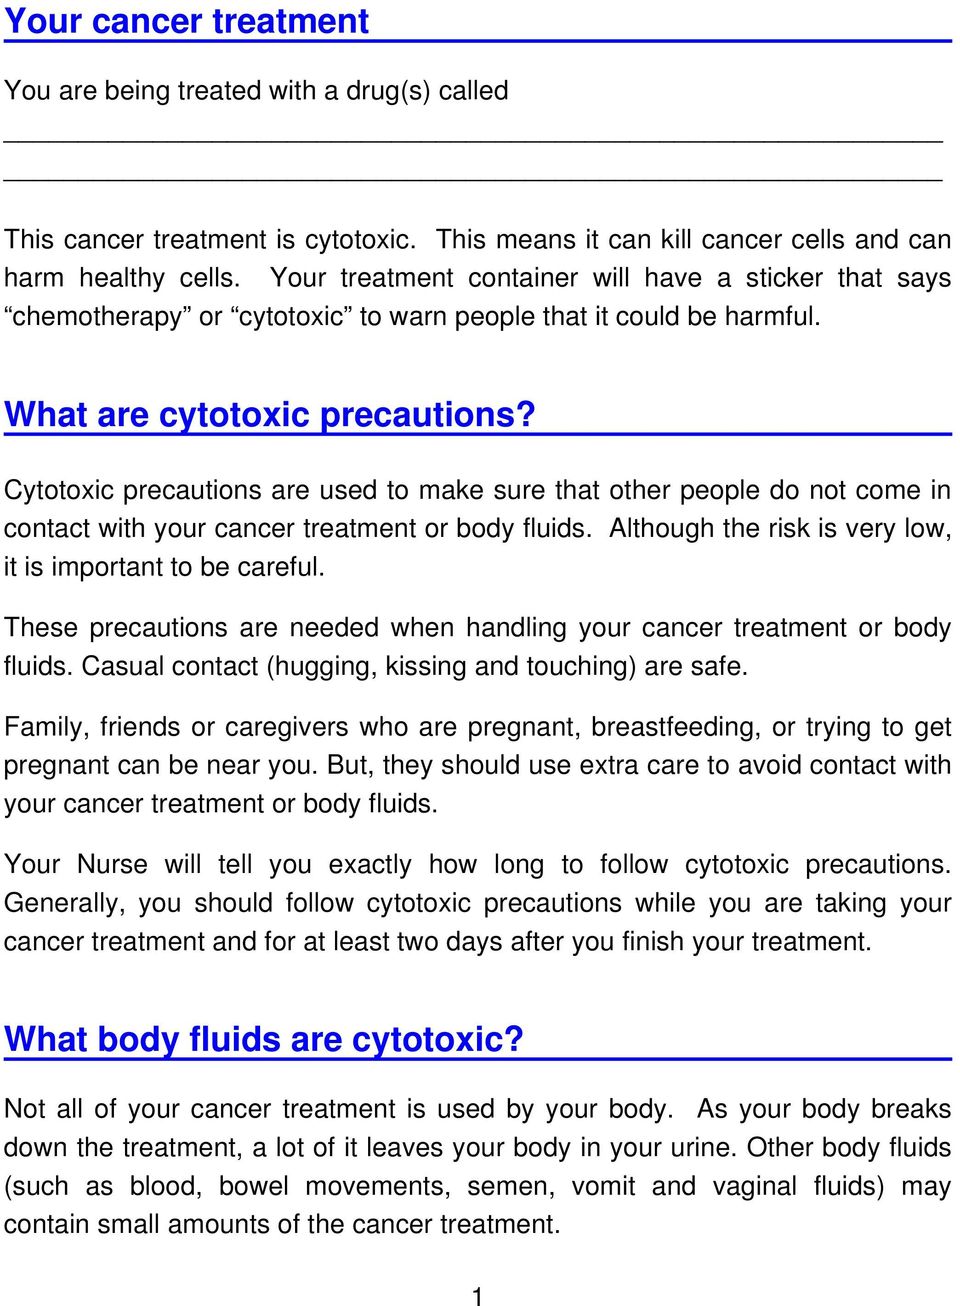 Cytotoxic precautions are used to make sure that other people do not come in contact with your cancer treatment or body fluids. Although the risk is very low, it is important to be careful.